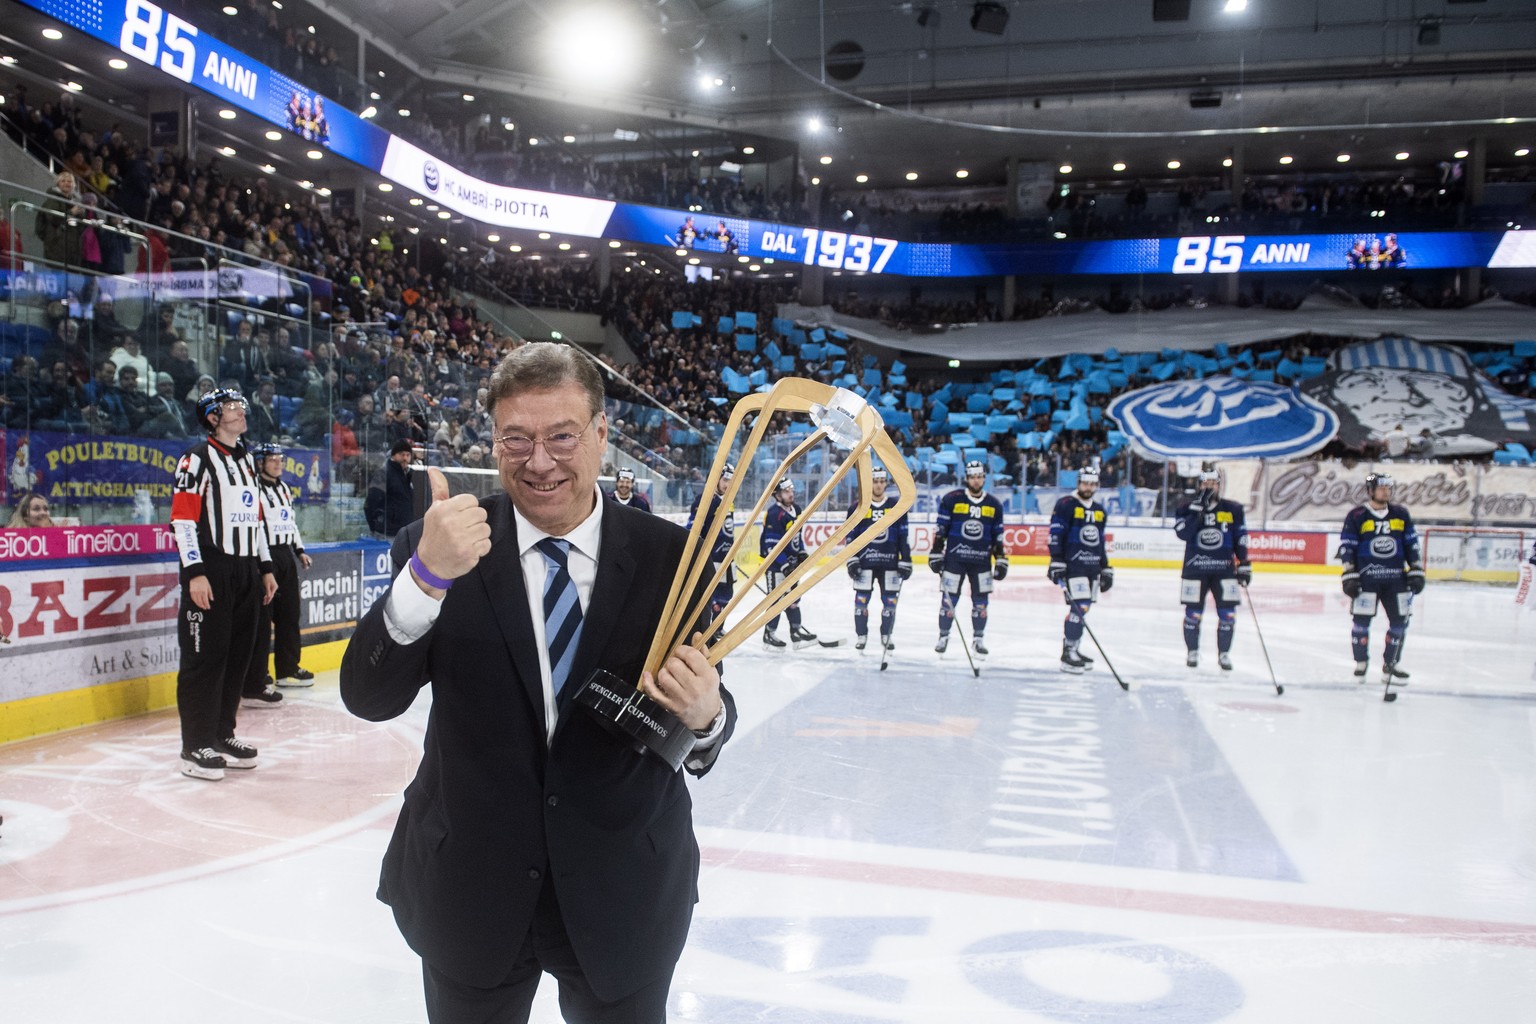 Ambri&#039;s president Filippo Lombardi with the Spengler Cup before the preliminary round game of National League Swiss Championship 2022/23 between HC Ambri Piotta and EHC Biel Bienne at the Gottard ...